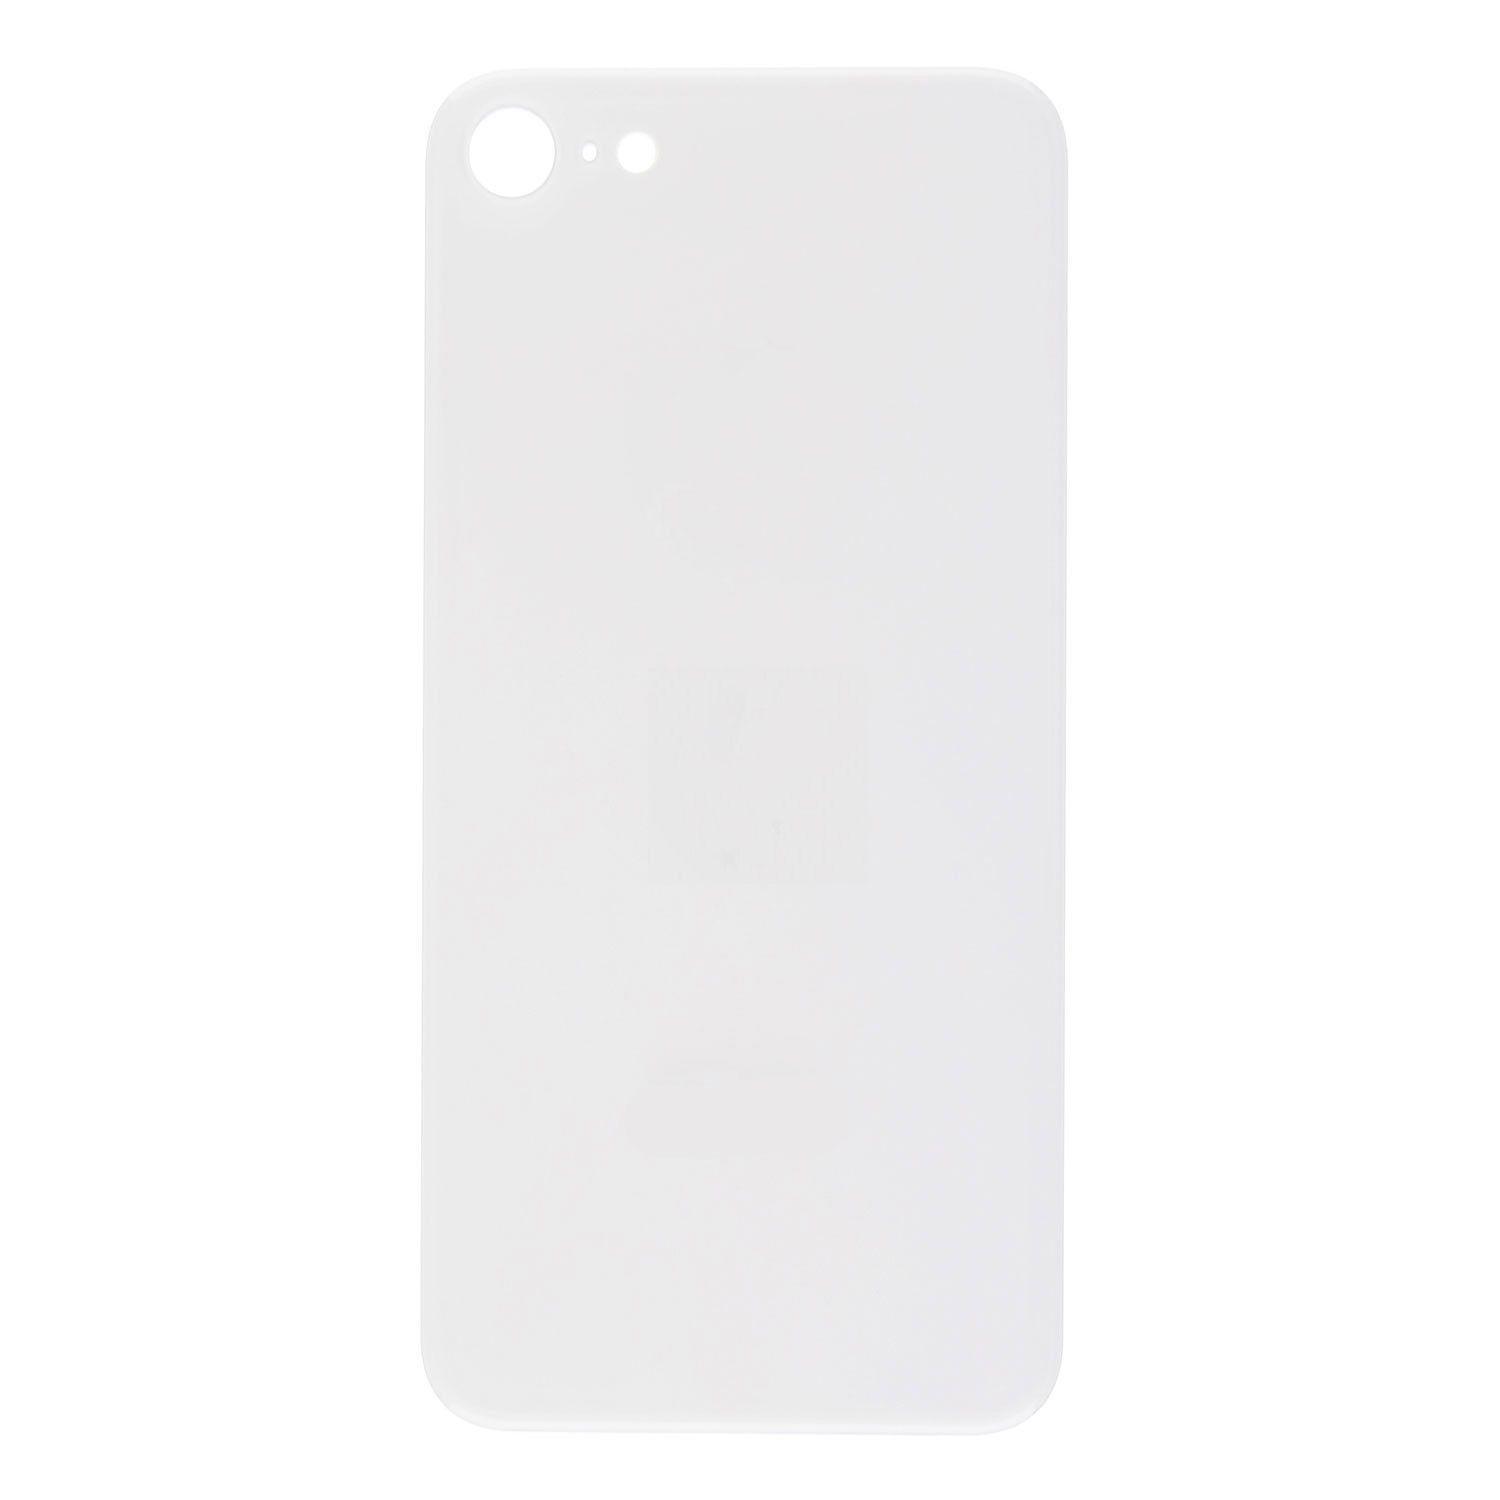 Battery cover iPhone SE 2020 with bigger hole for camera glass - white